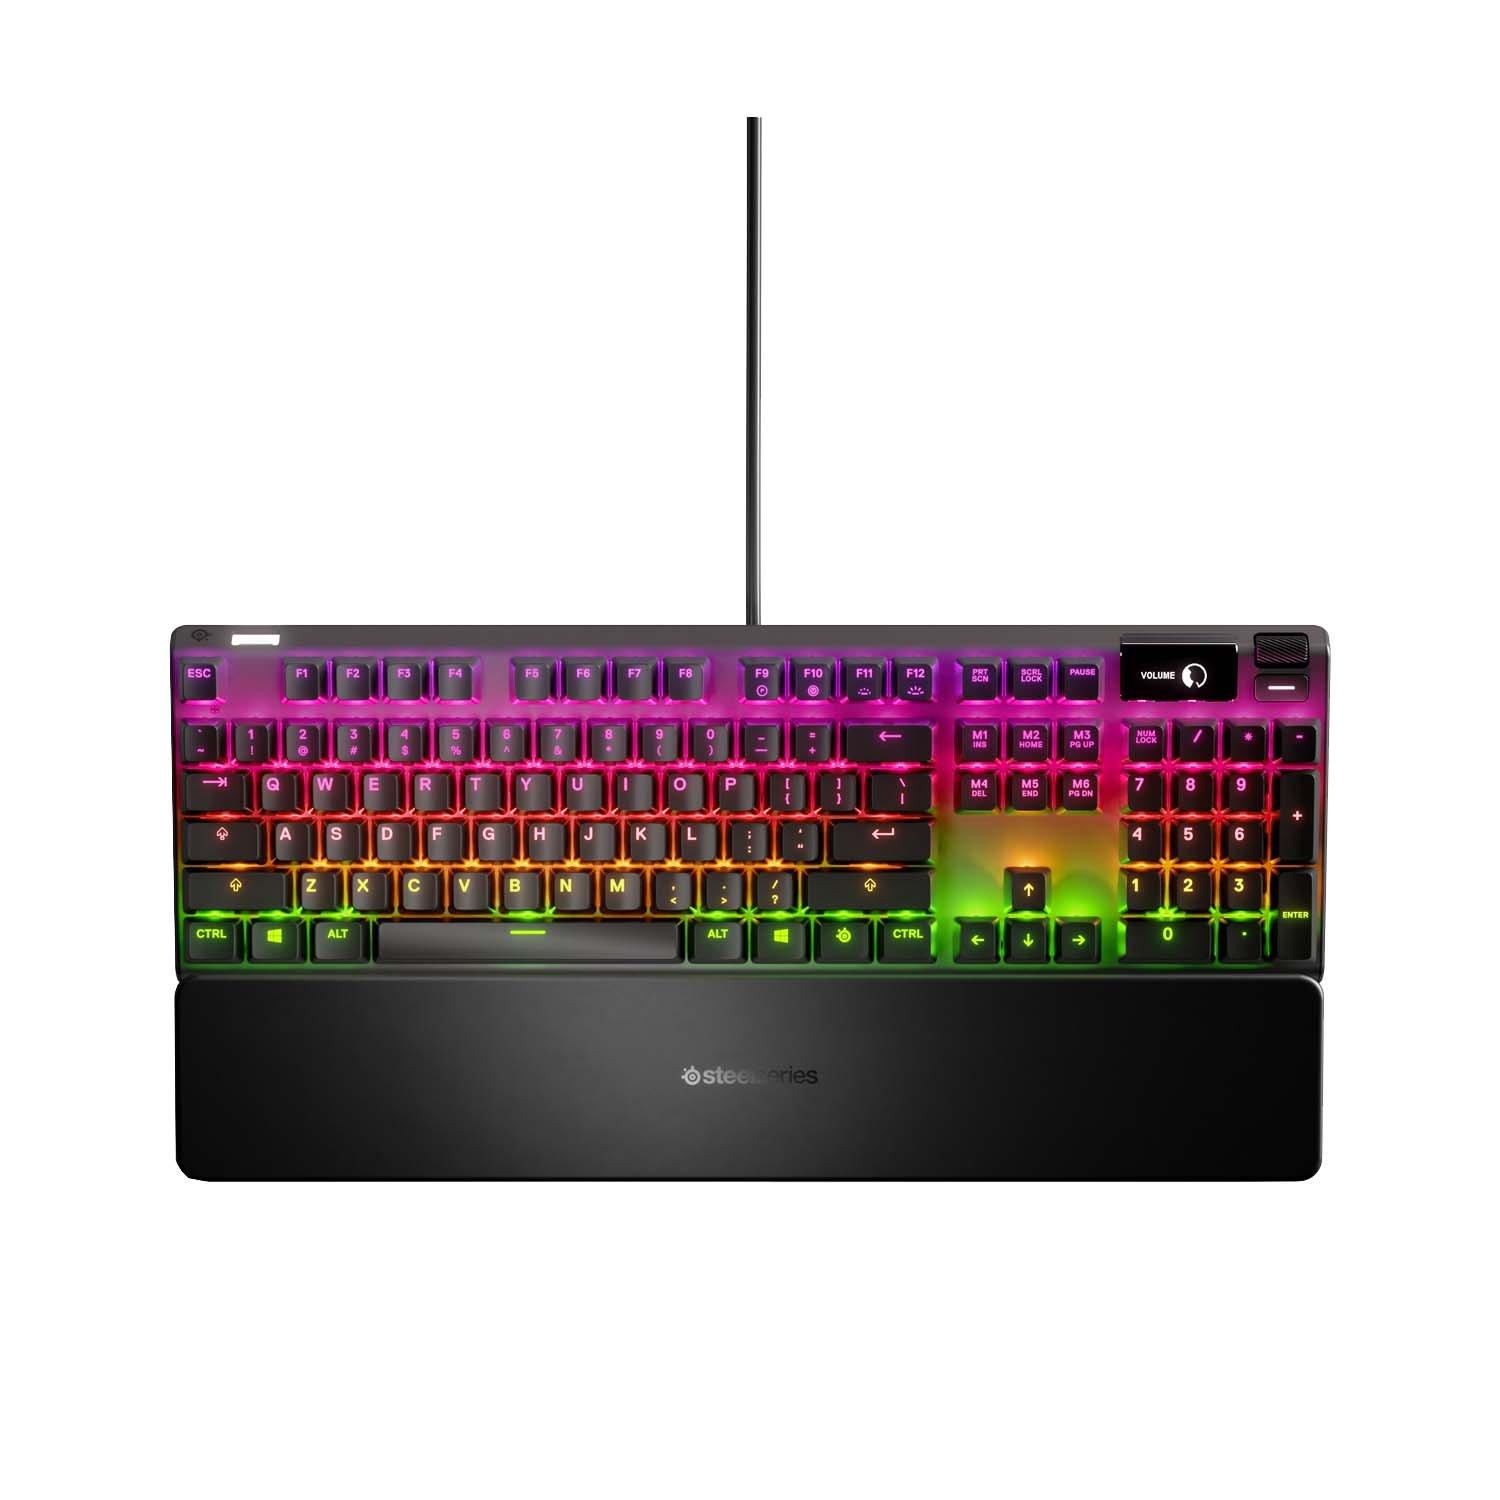 SteelSeries Apex Mechanical Gaming Keyboard OLED Smart Display USB Passthrough and Media CONTROLS Tactile and Quiet RGB Backlit (Brown Switc